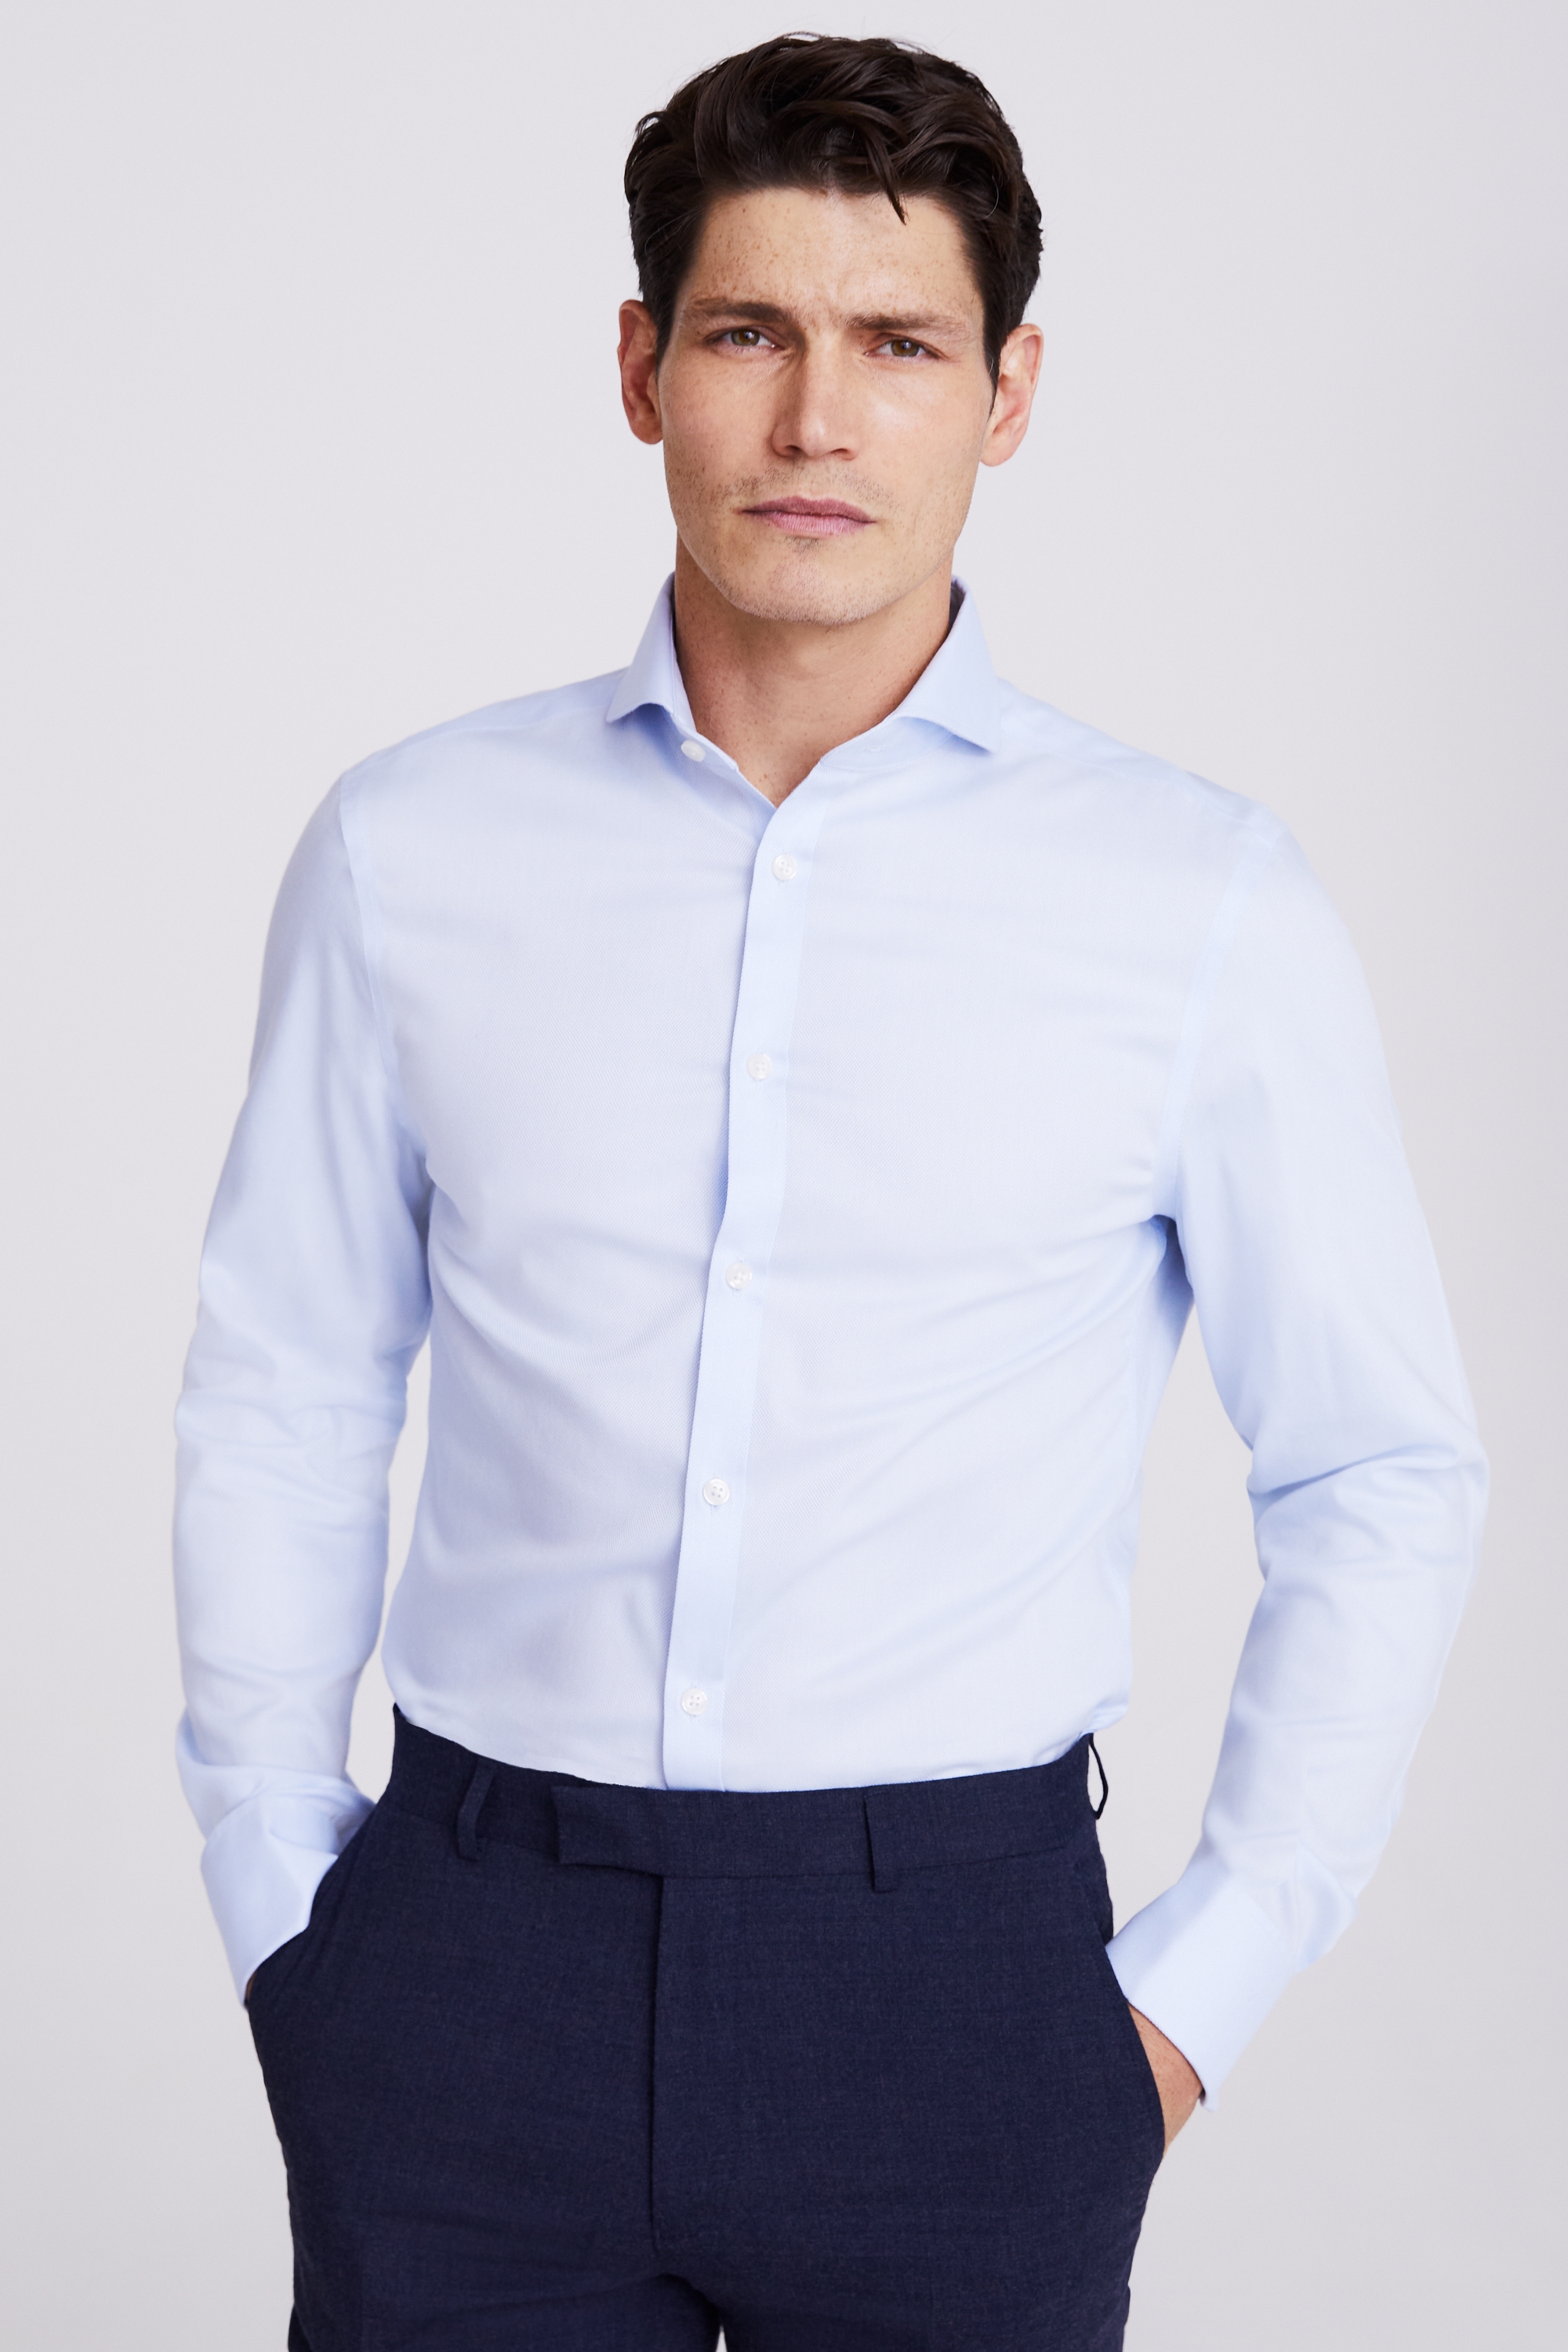 Slim Fit Sky Royal Oxford Non-Iron Shirt | Buy Online at Moss